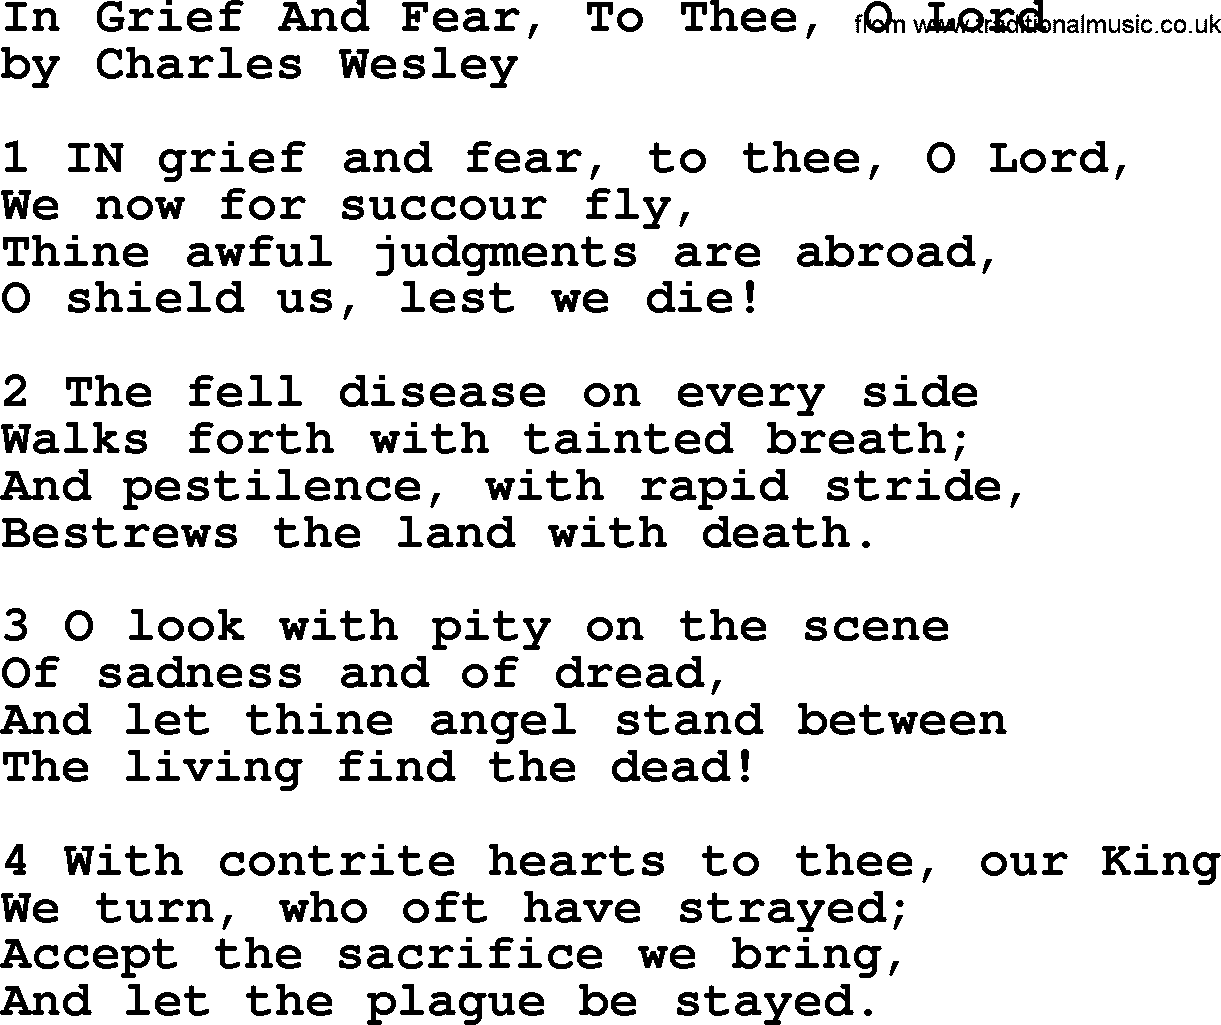 Charles Wesley hymn: In Grief And Fear, To Thee, O Lord, lyrics